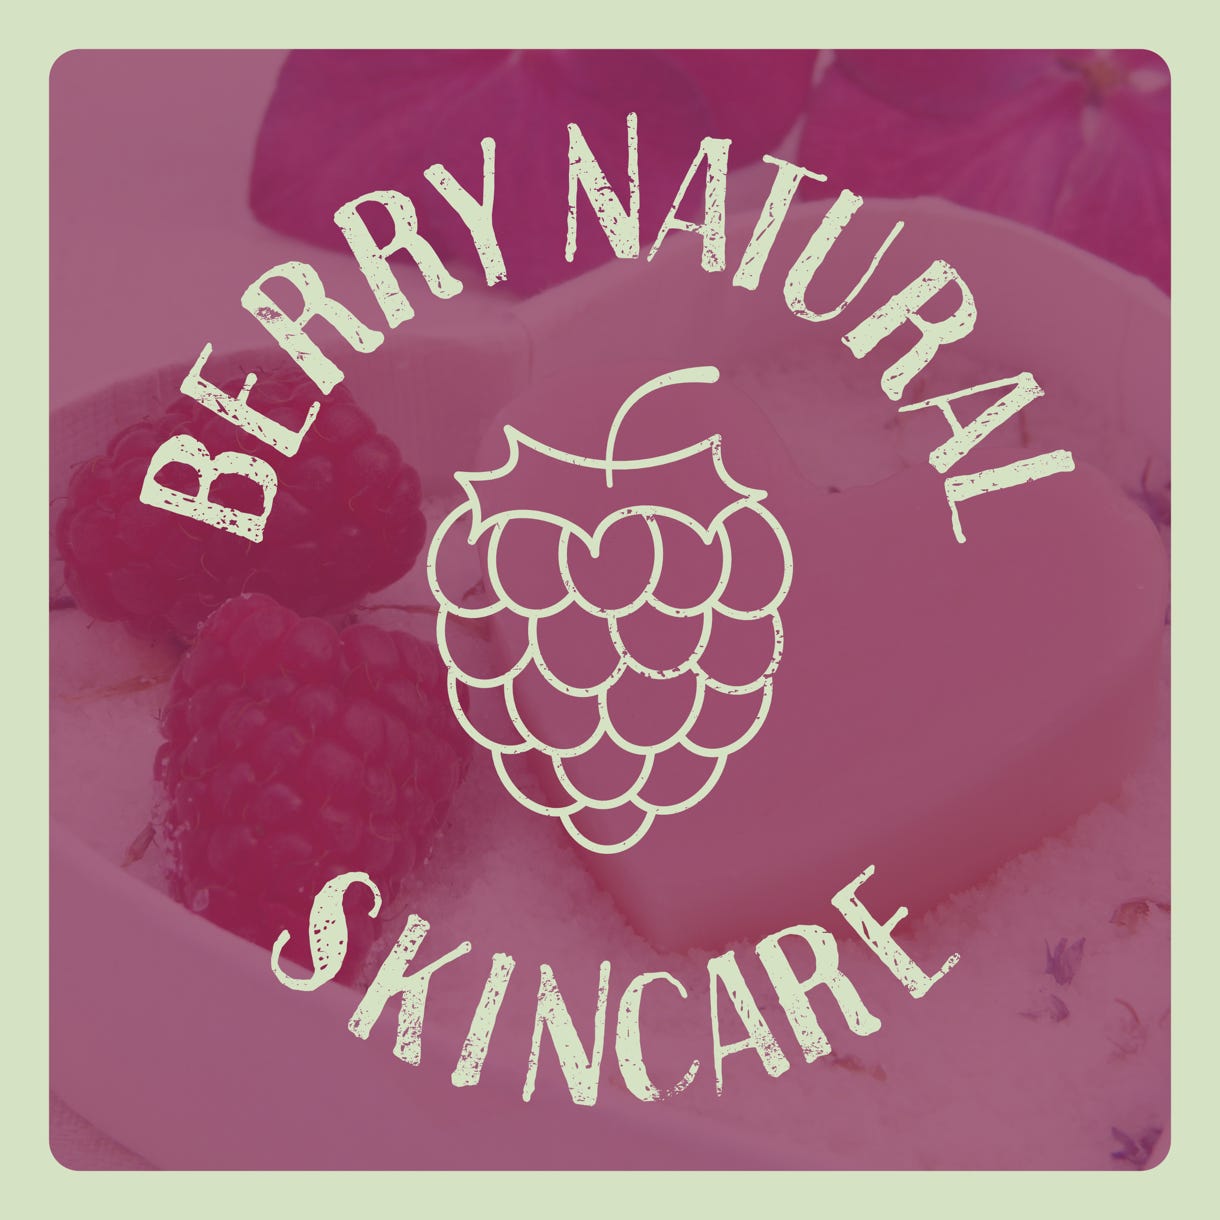 Berry Natural Skincare - Logo with Background Design